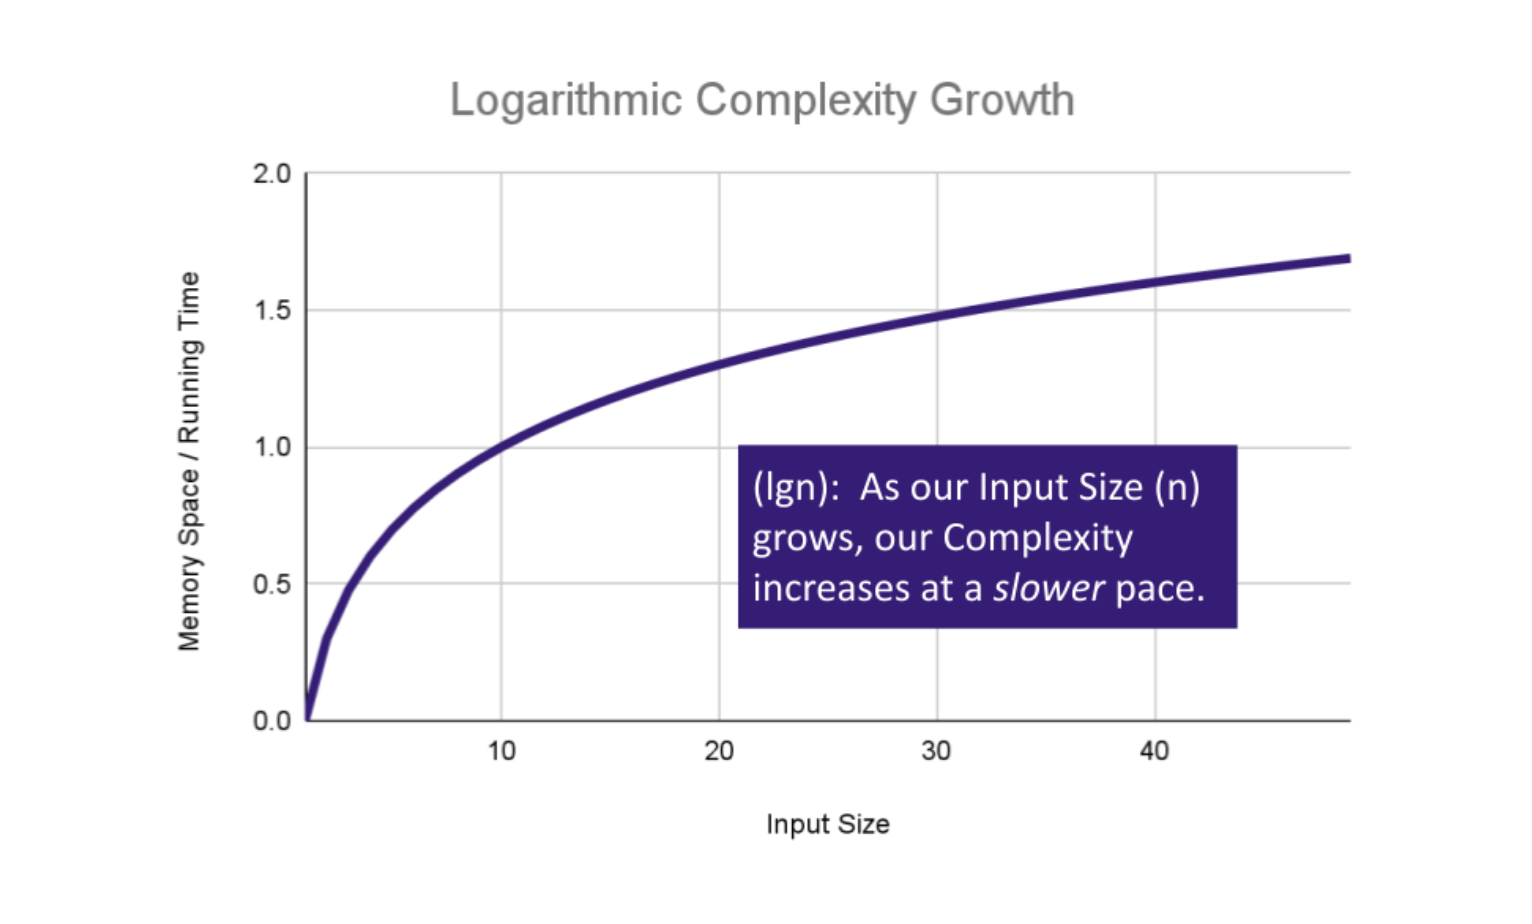 Logarithmic complexity